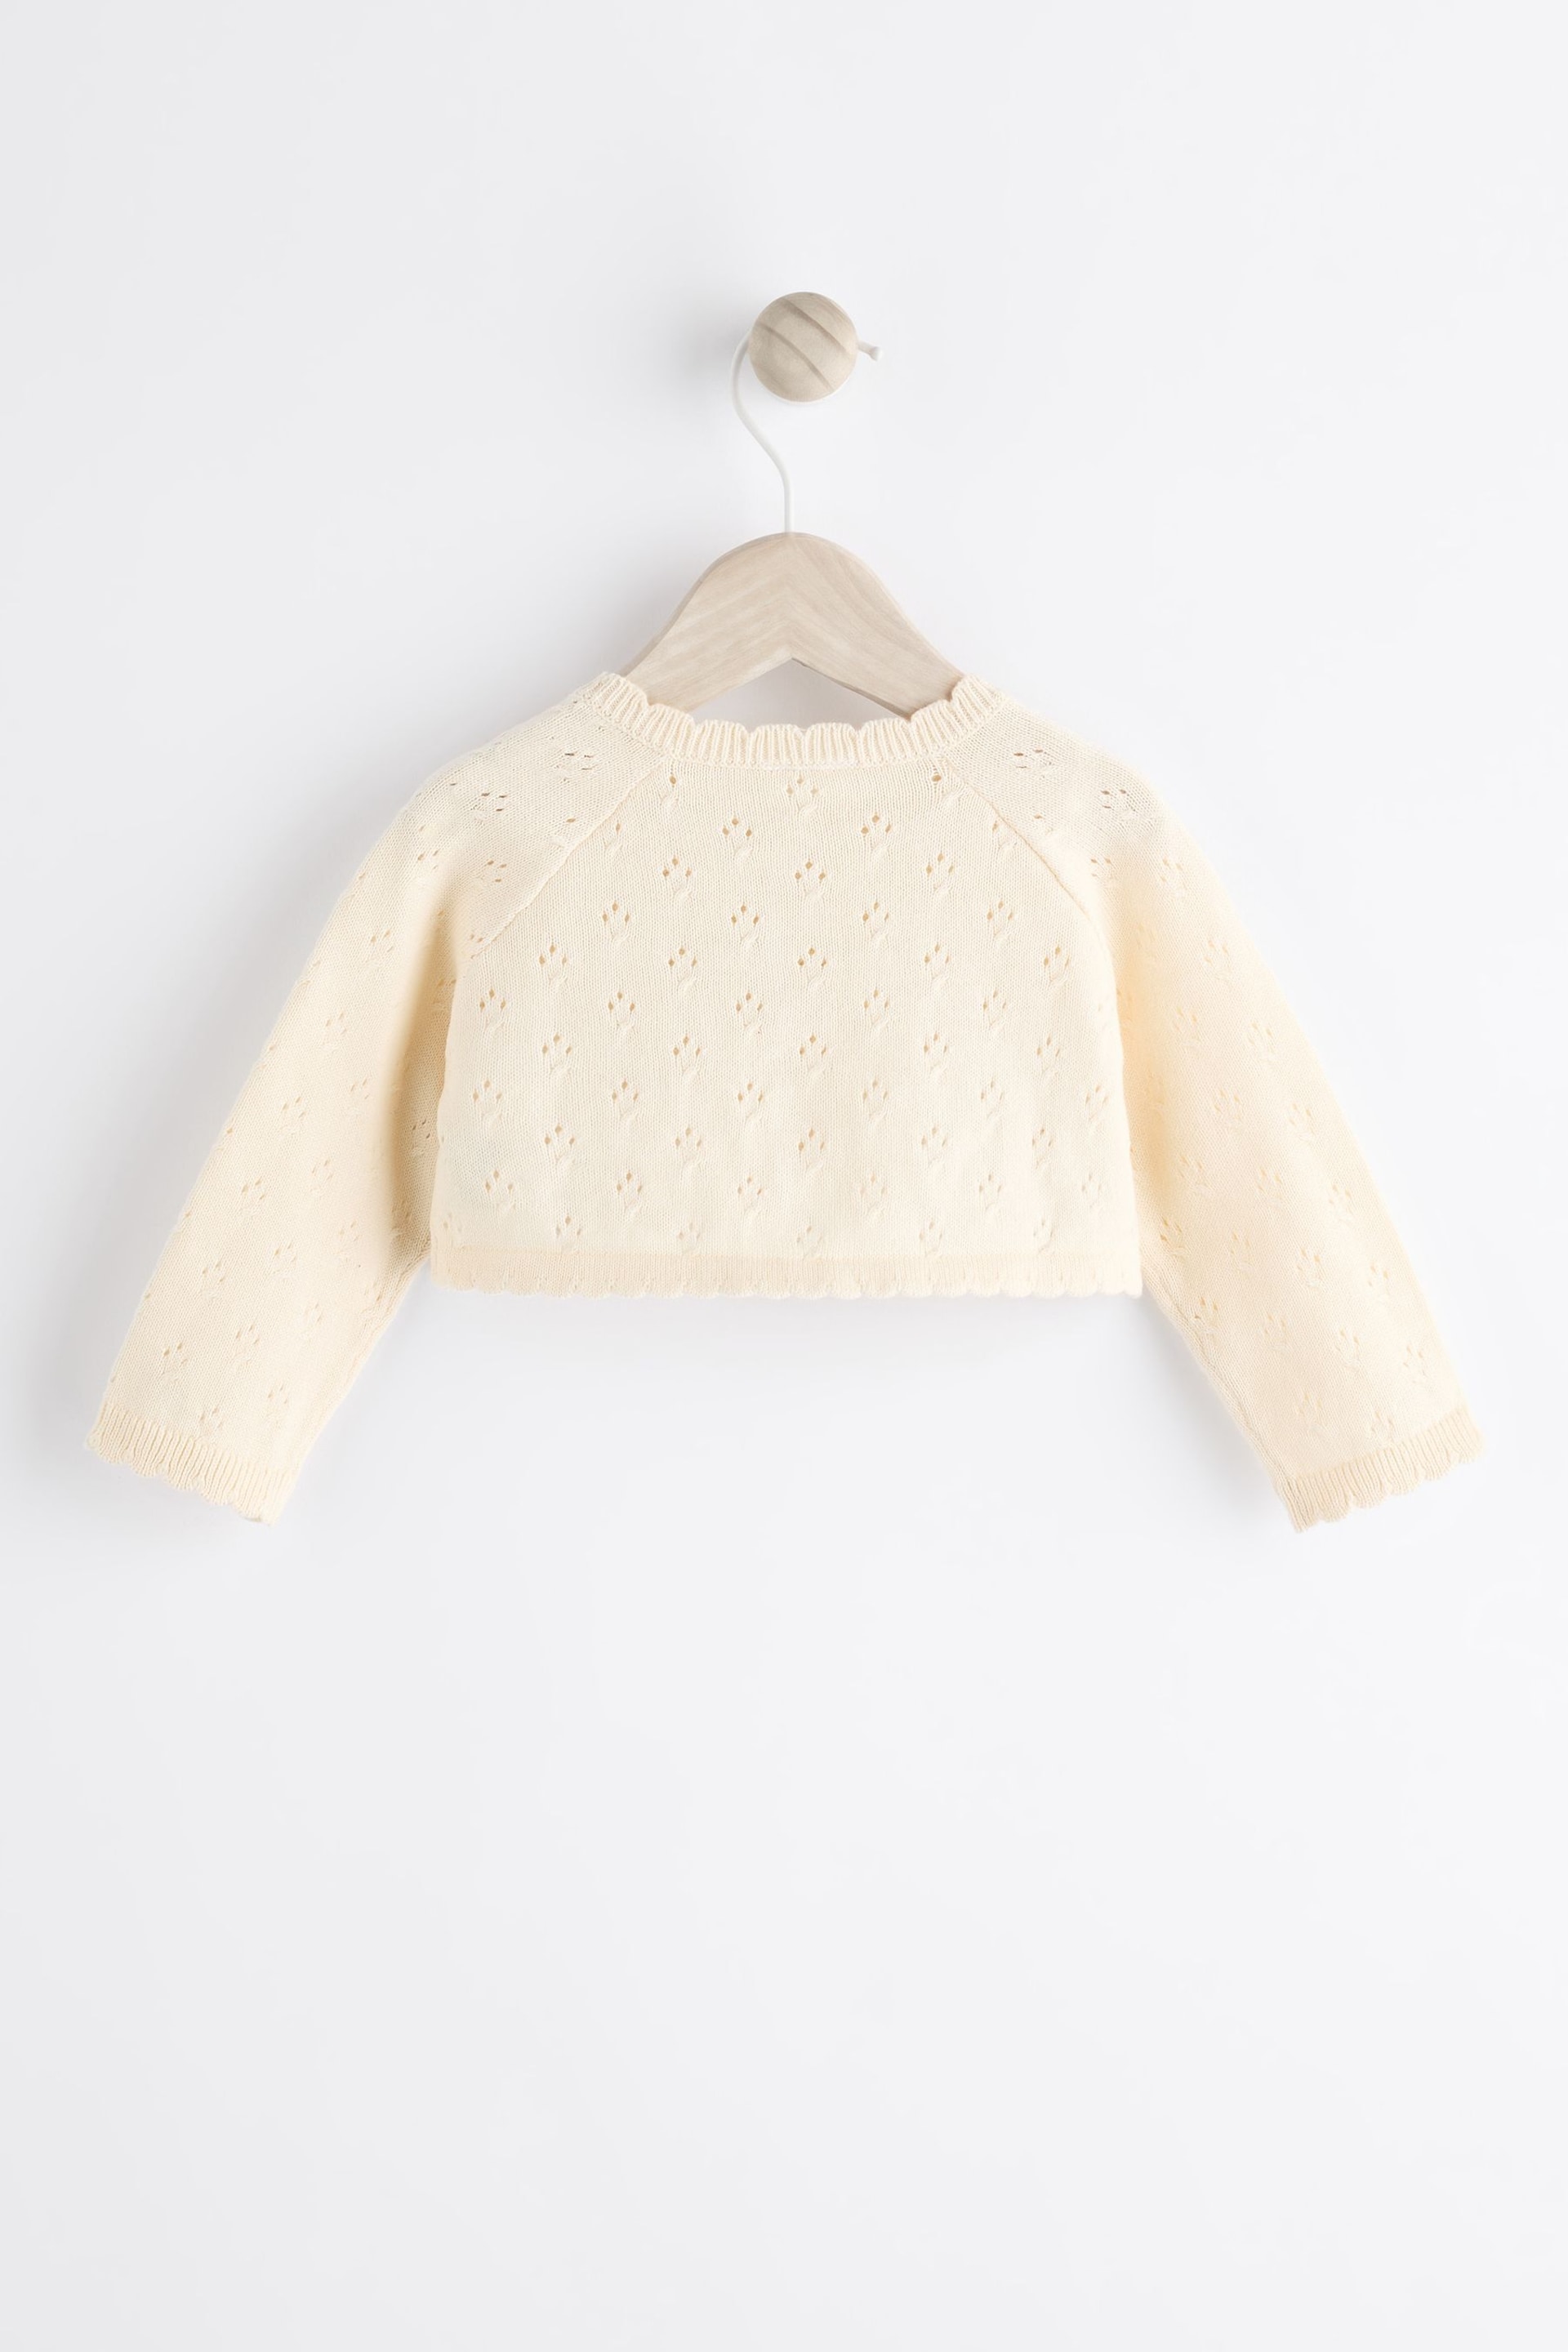 Cream Pointelle Baby Knitted Shrug Cardigan (0mths-2yrs) - Image 2 of 7